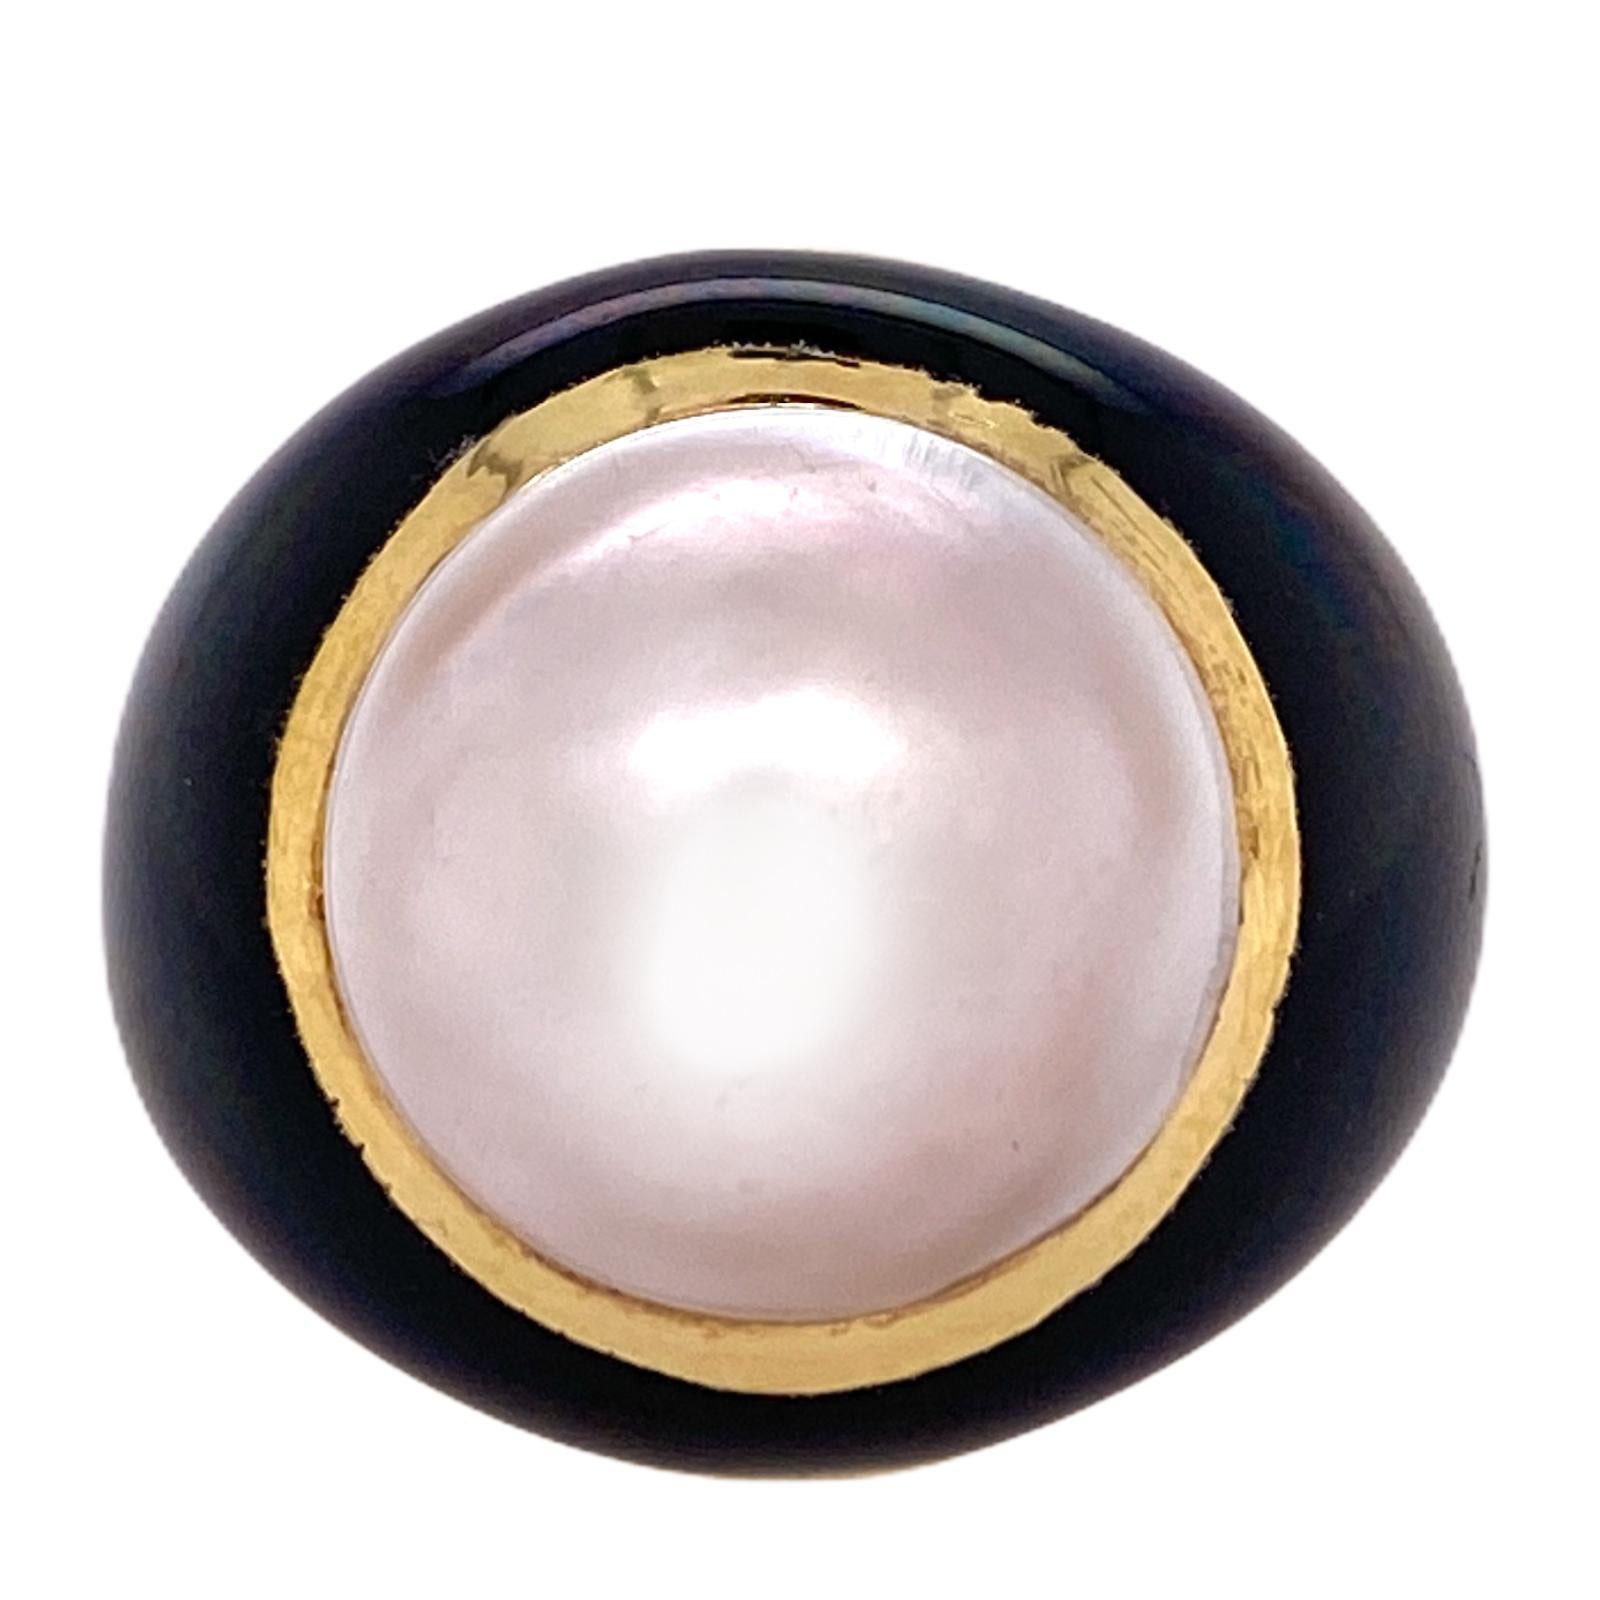 Beautiful mabe pearl and black onyx cocktail ring fashioned in 18 karat yellow gold. The ring features a white mabe pearl bezel set in an yellow gold bezel and surrounding black onyx. The ring is in excellent condition, measures 20mm in width, 10mm